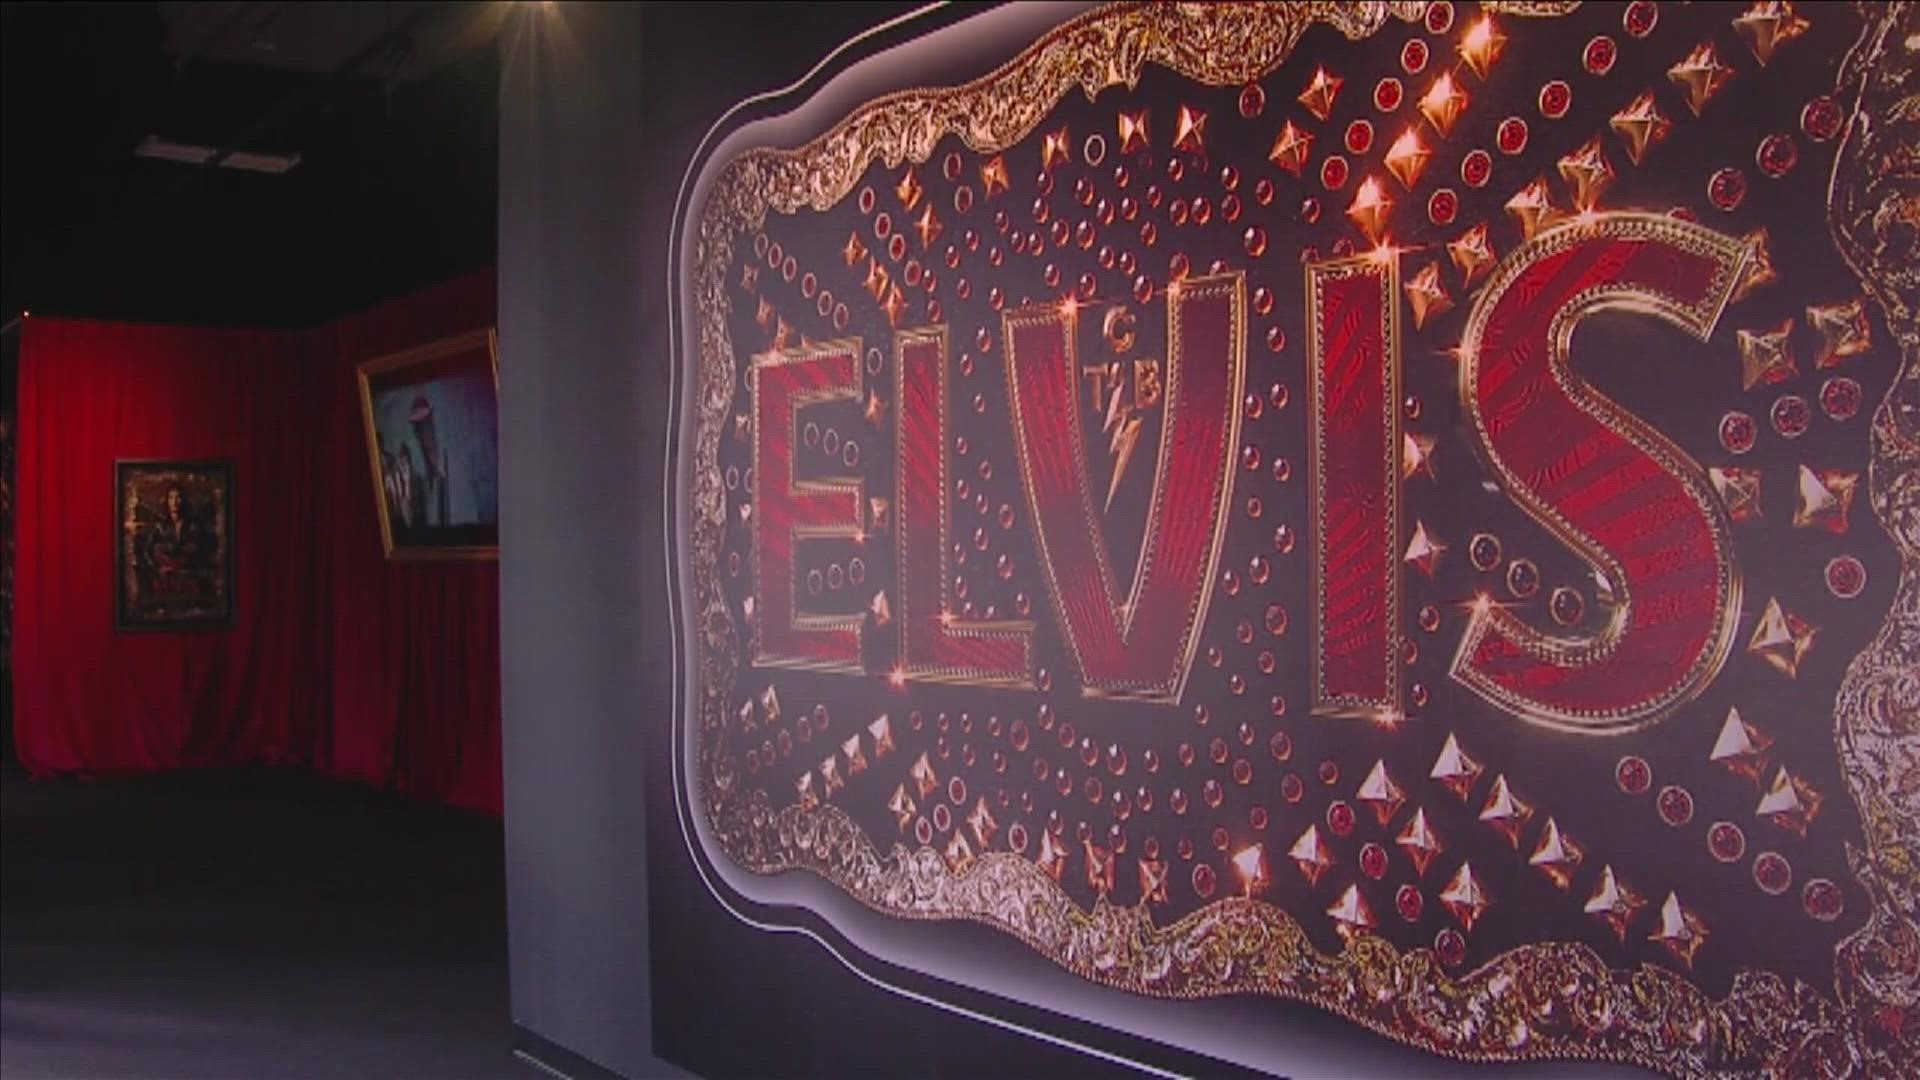 The ‘Making of Elvis’ exhibit is a behind-the-scenes look at the making of Baz Luhrmann’s movie ‘Elvis,’ which was released last year.